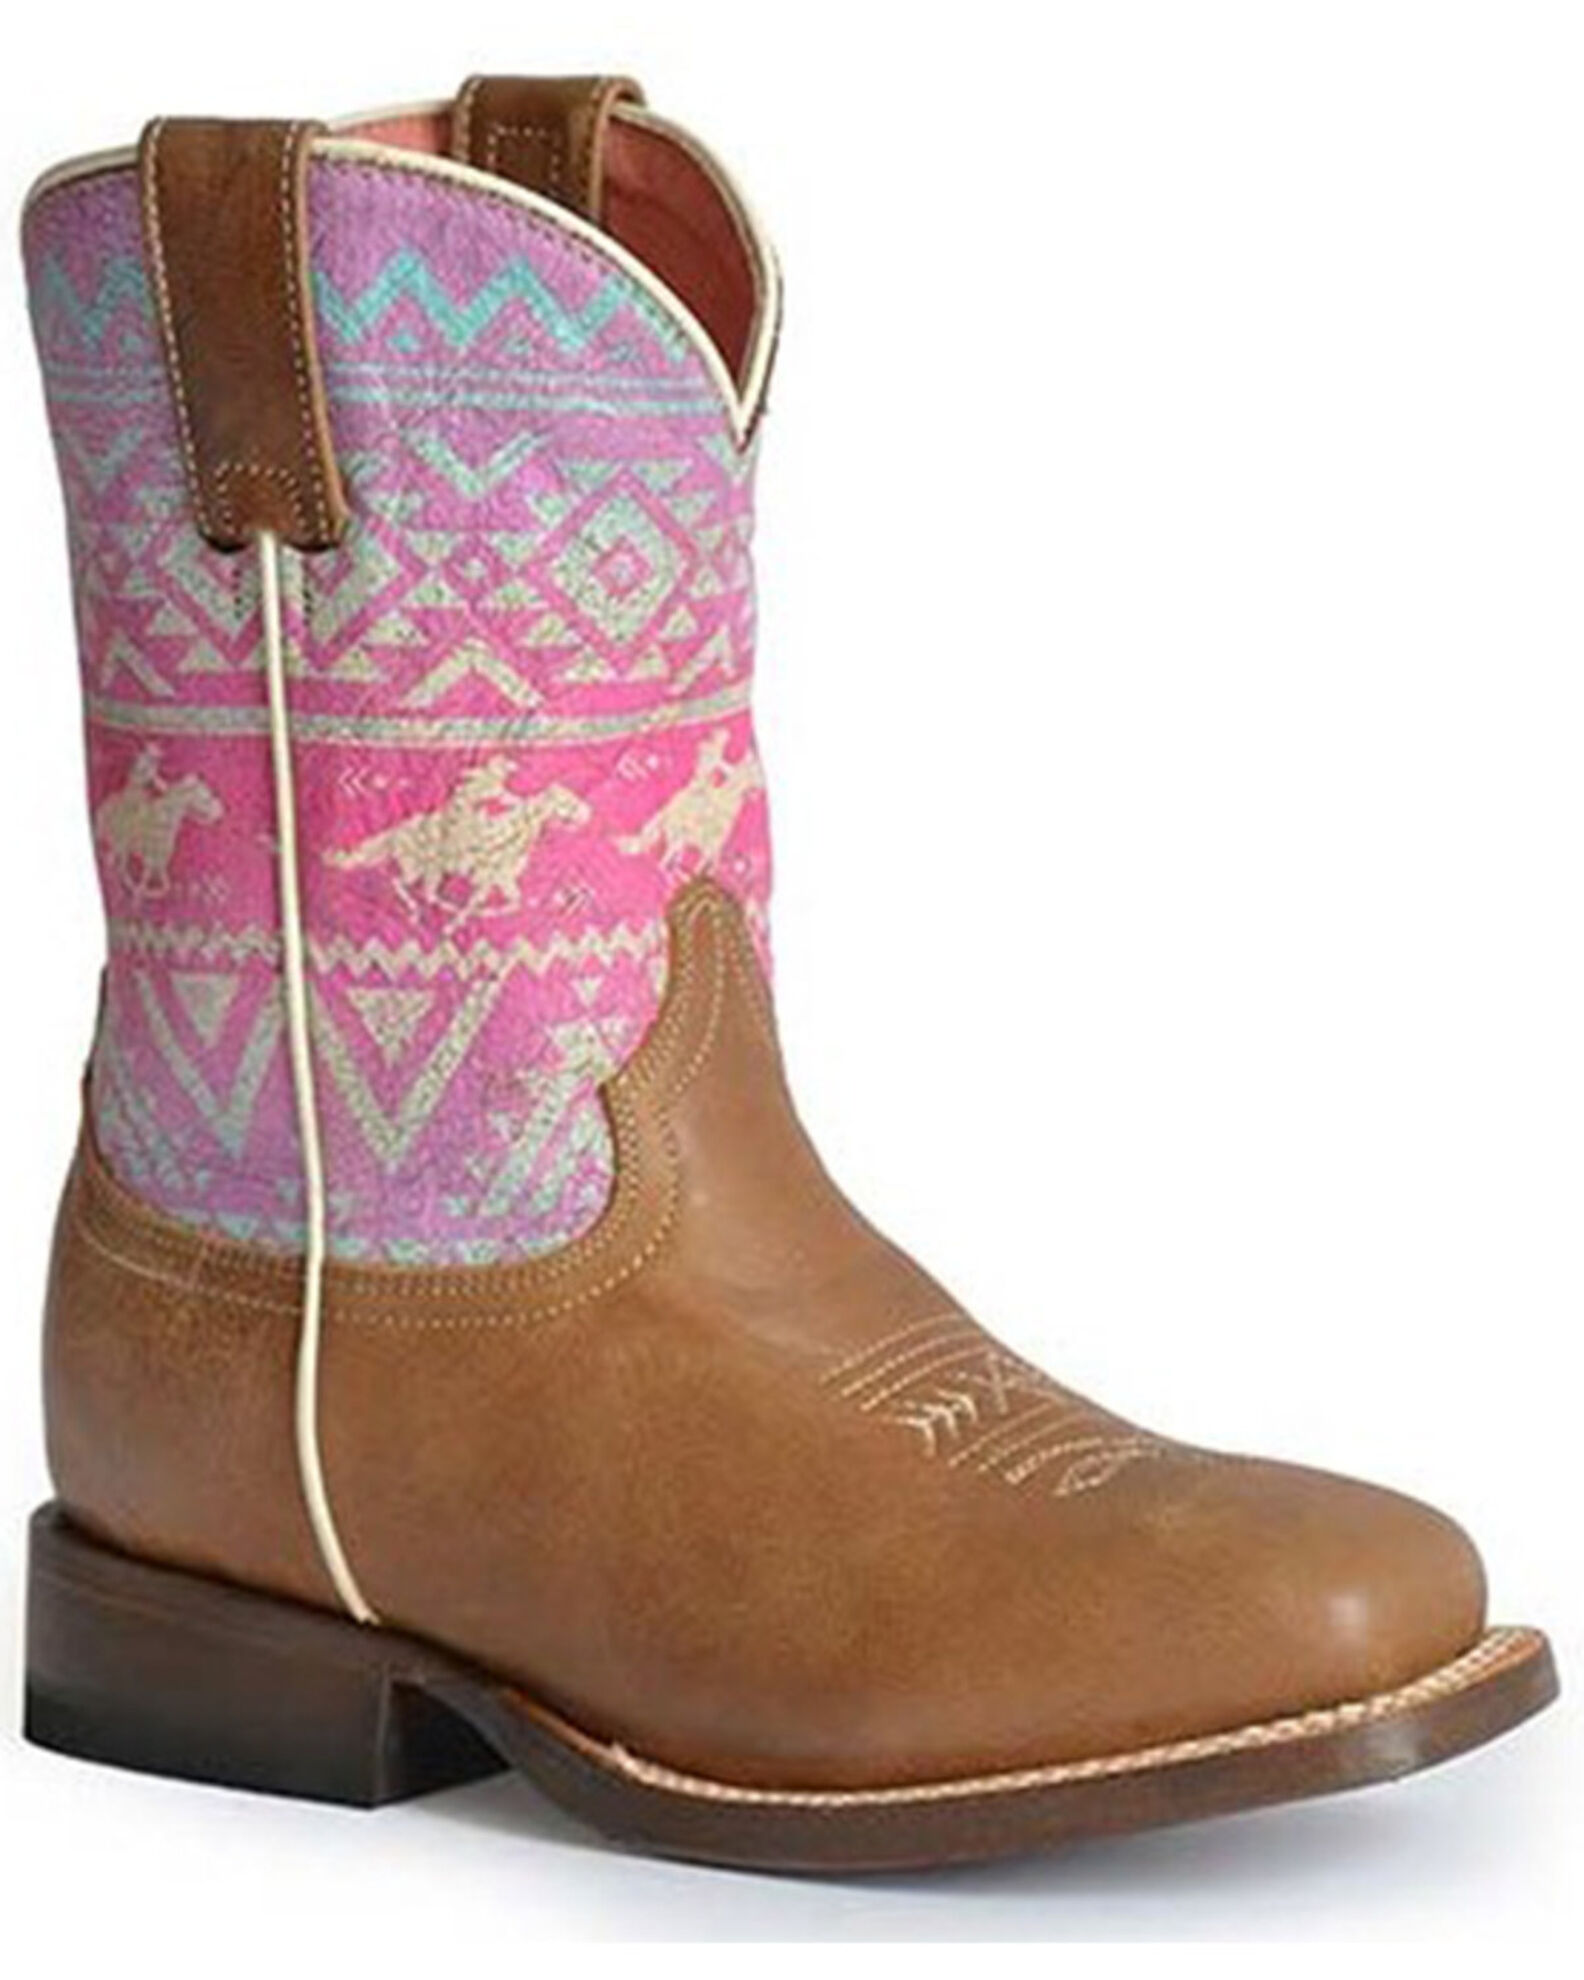 Roper Little Girls' Pony Western Boots - Square Toe